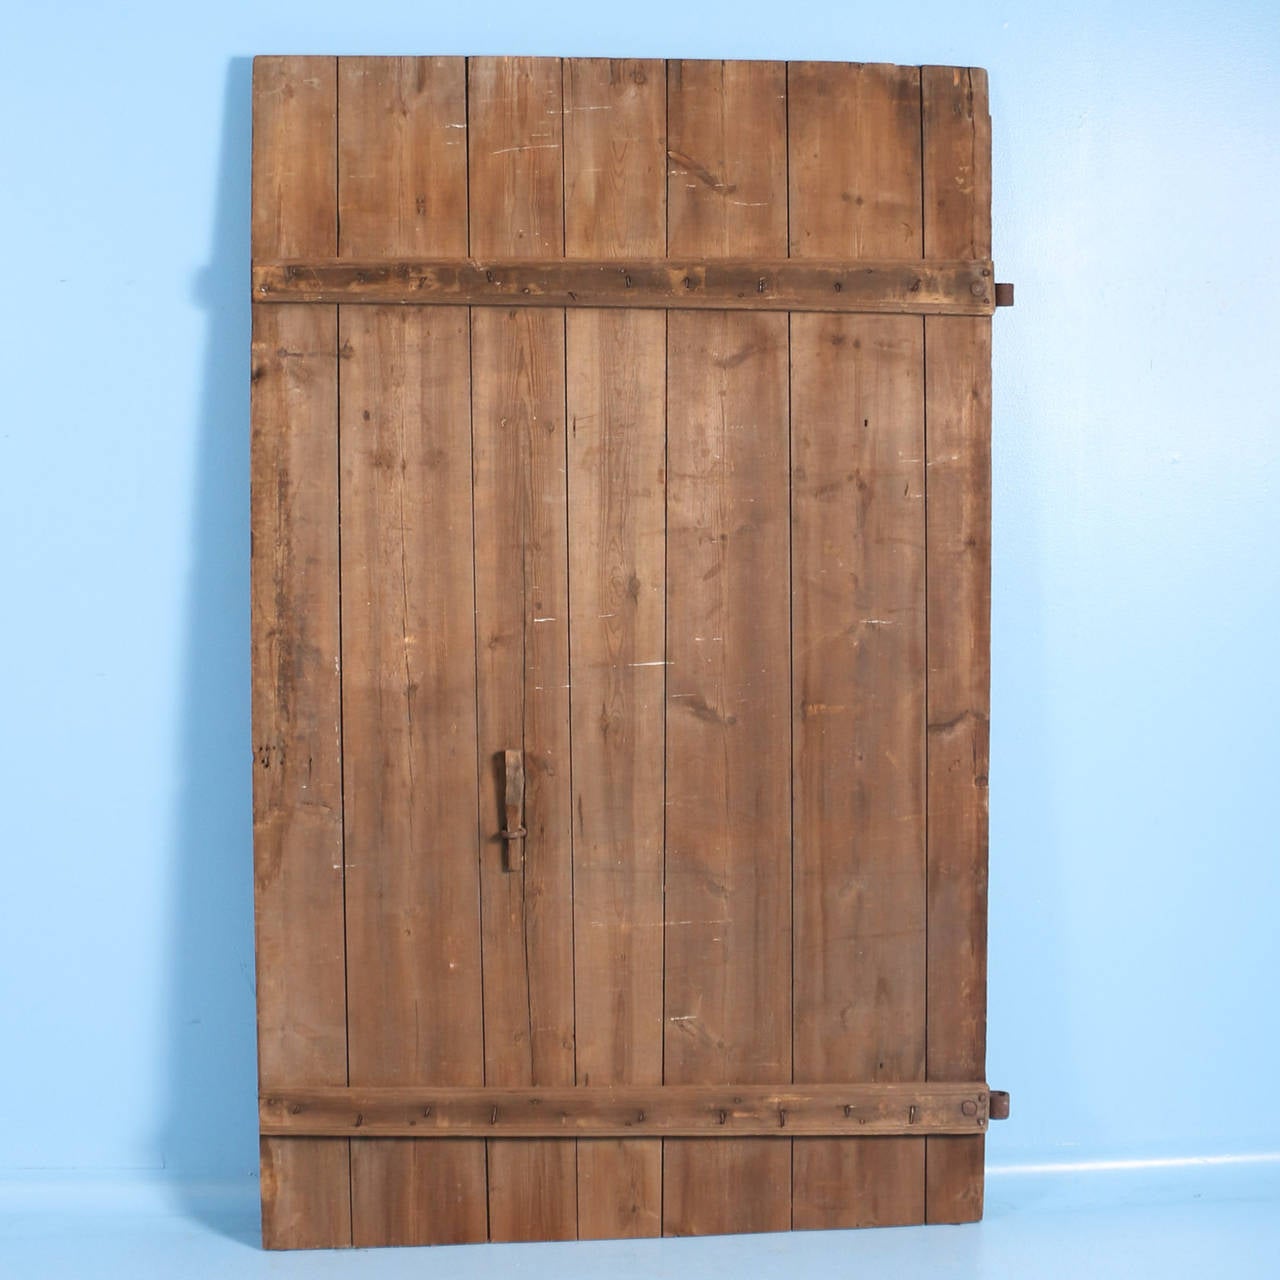 This very large barn door has an aged, weathered look due to years of constant use outdoors. The wood and iron have great character, please examine the close up photos to appreciate these details. This door will be perfect to hang on a sliding